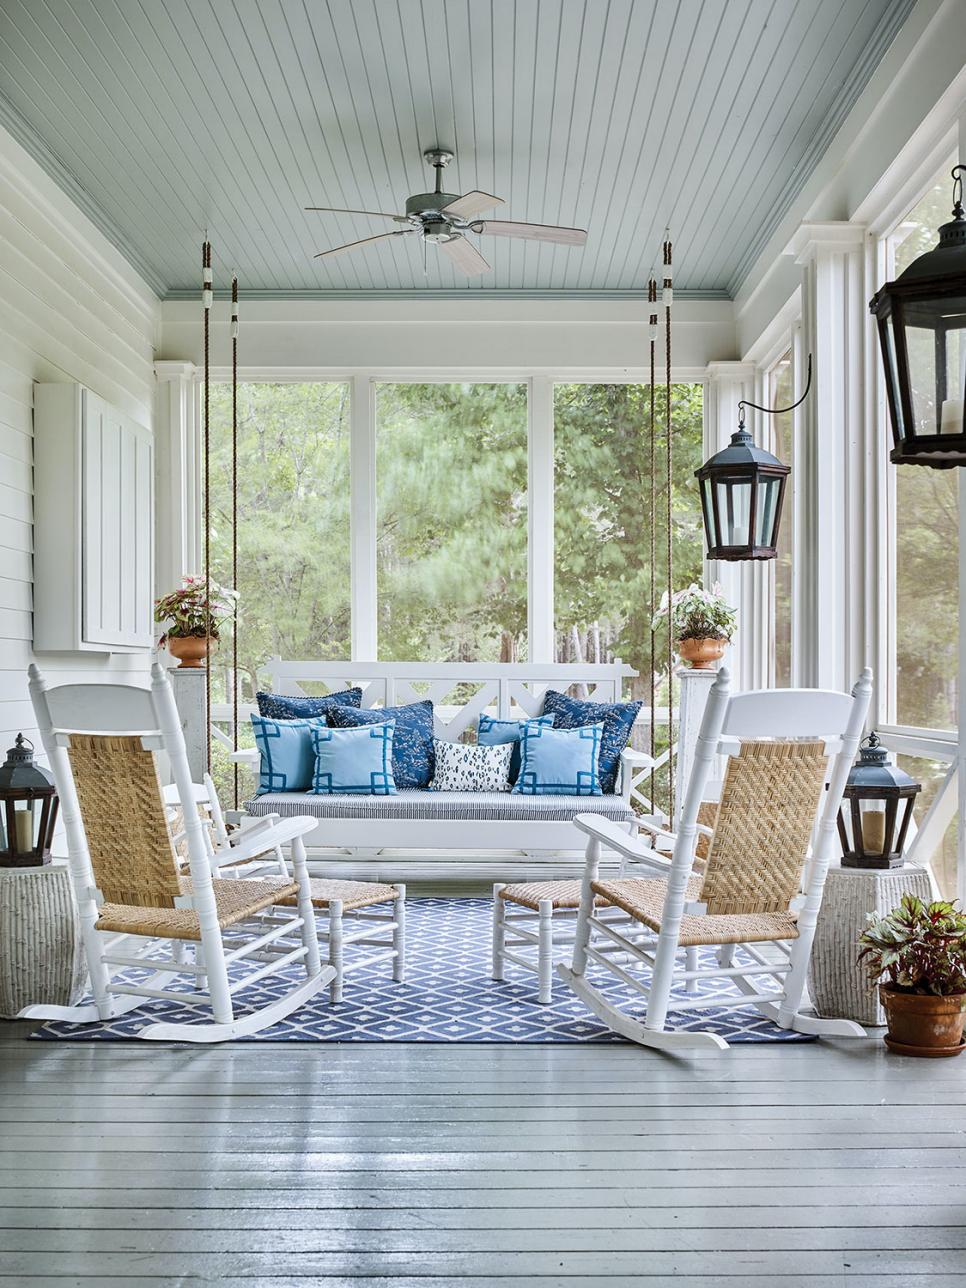 Screened-In Porch With Rocking Chairs | HGTV